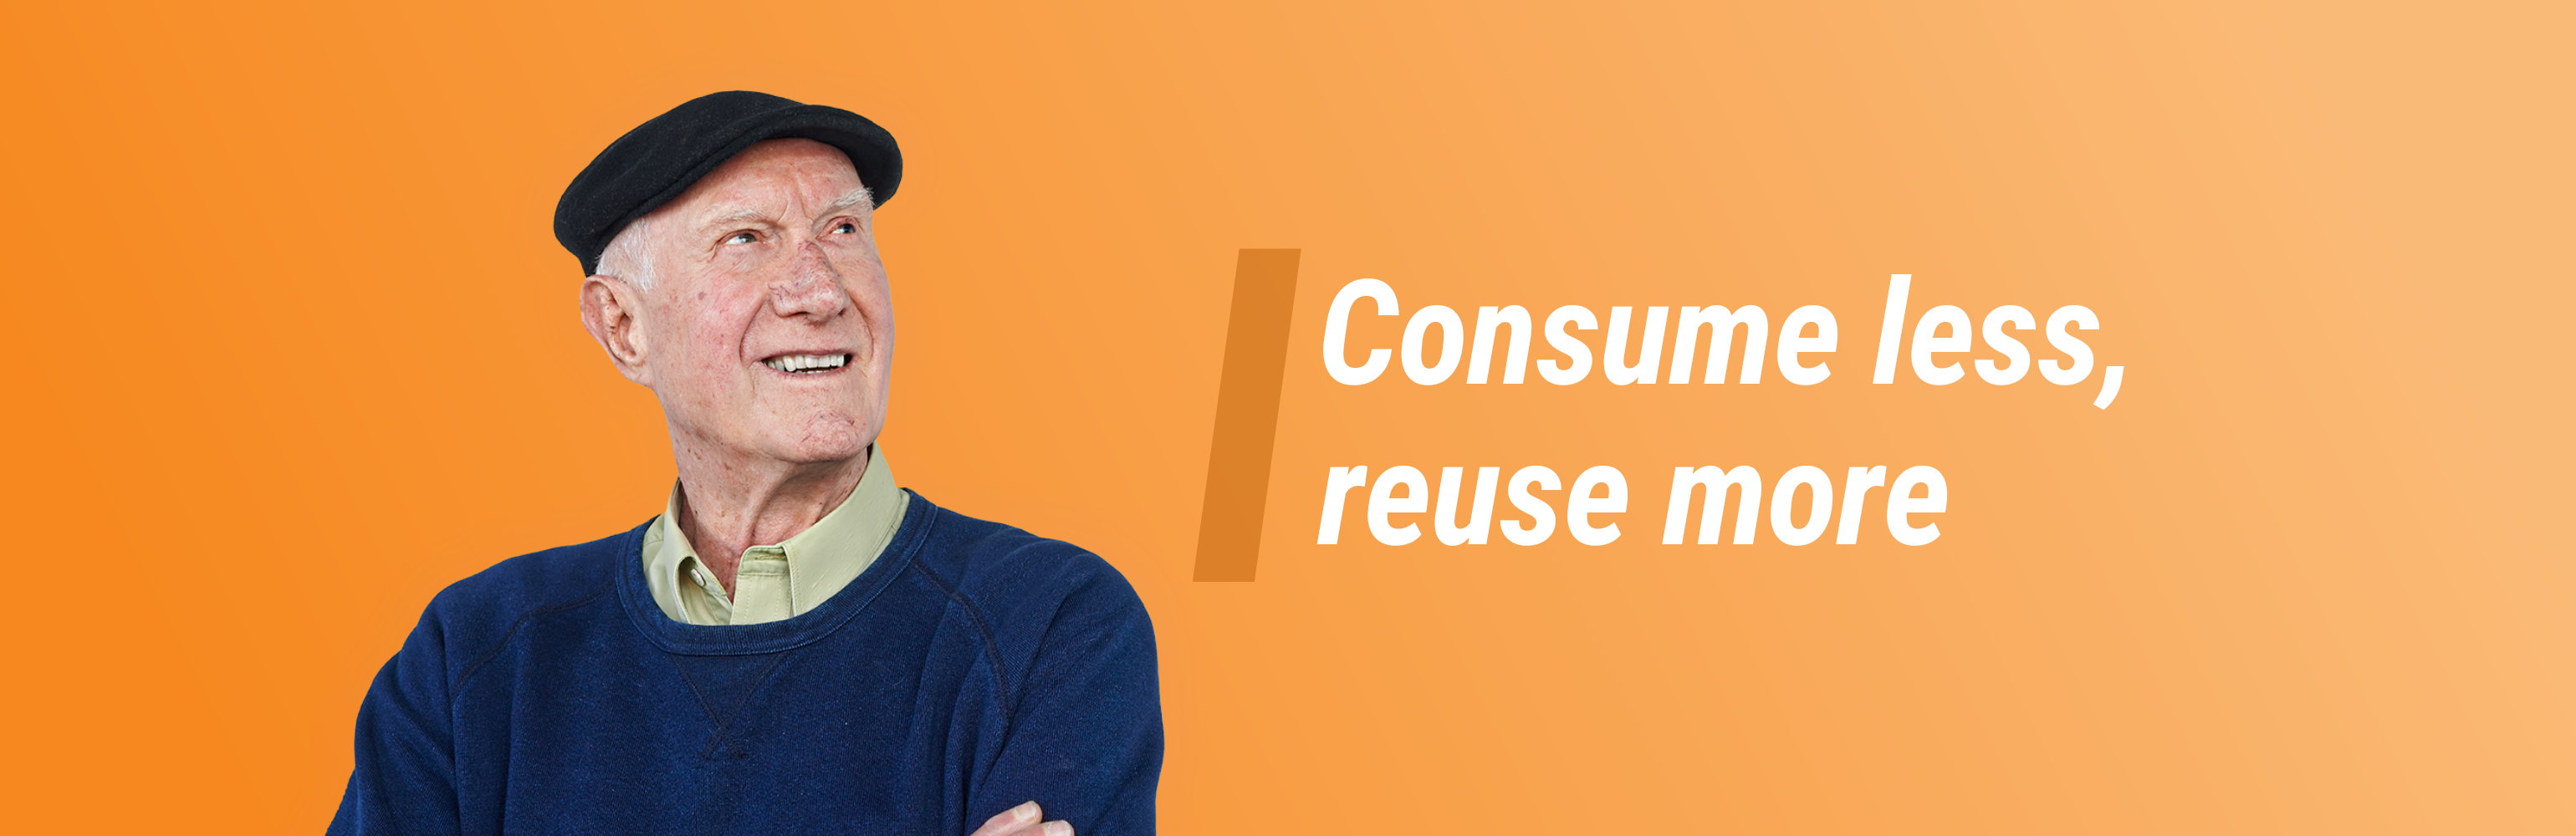 'Consume less, reuse more'